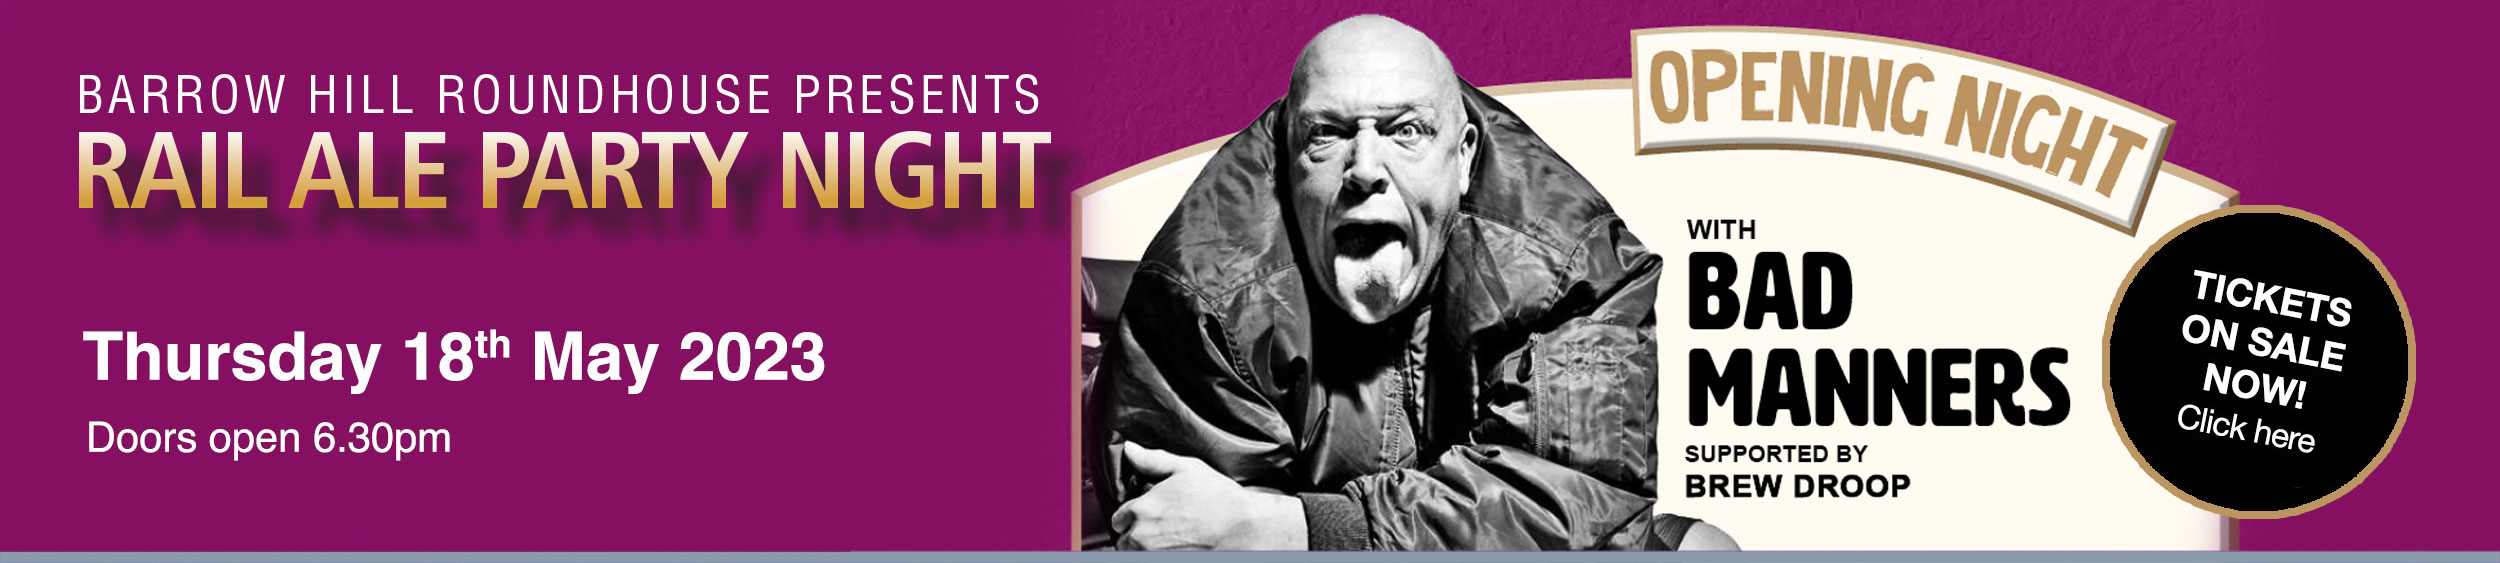 Bad Manners Live Rail Ale Party Night